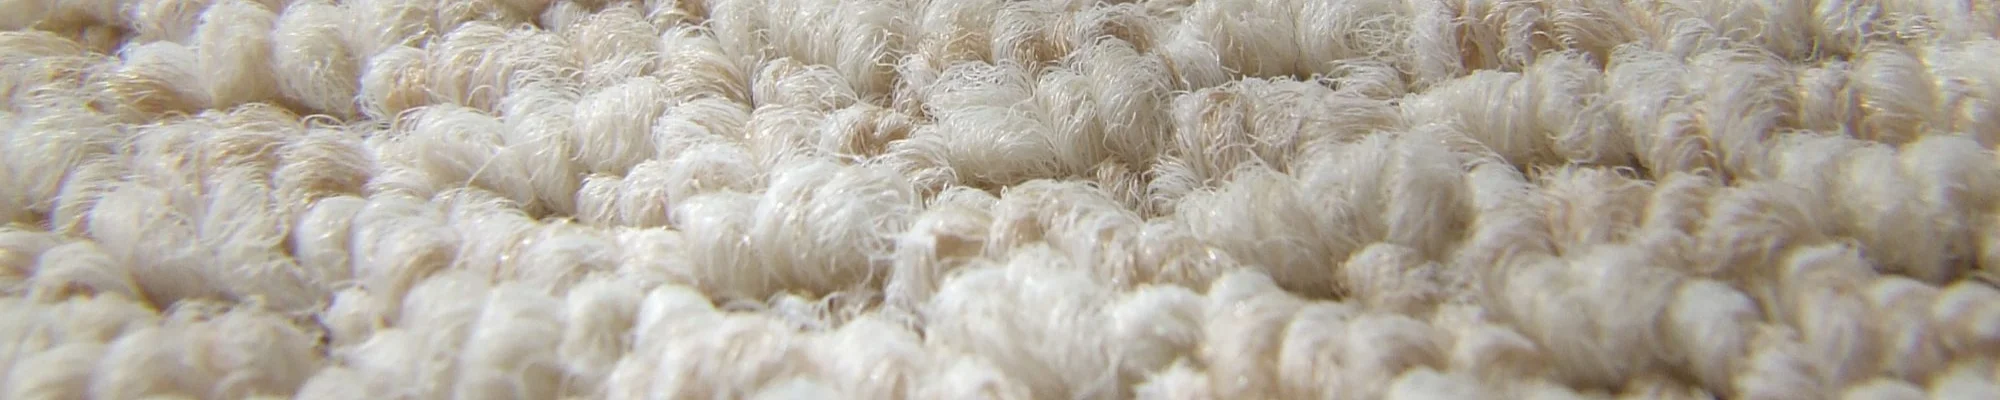 Carpet fibers information shared by Floors USA in King of Prussia, PA